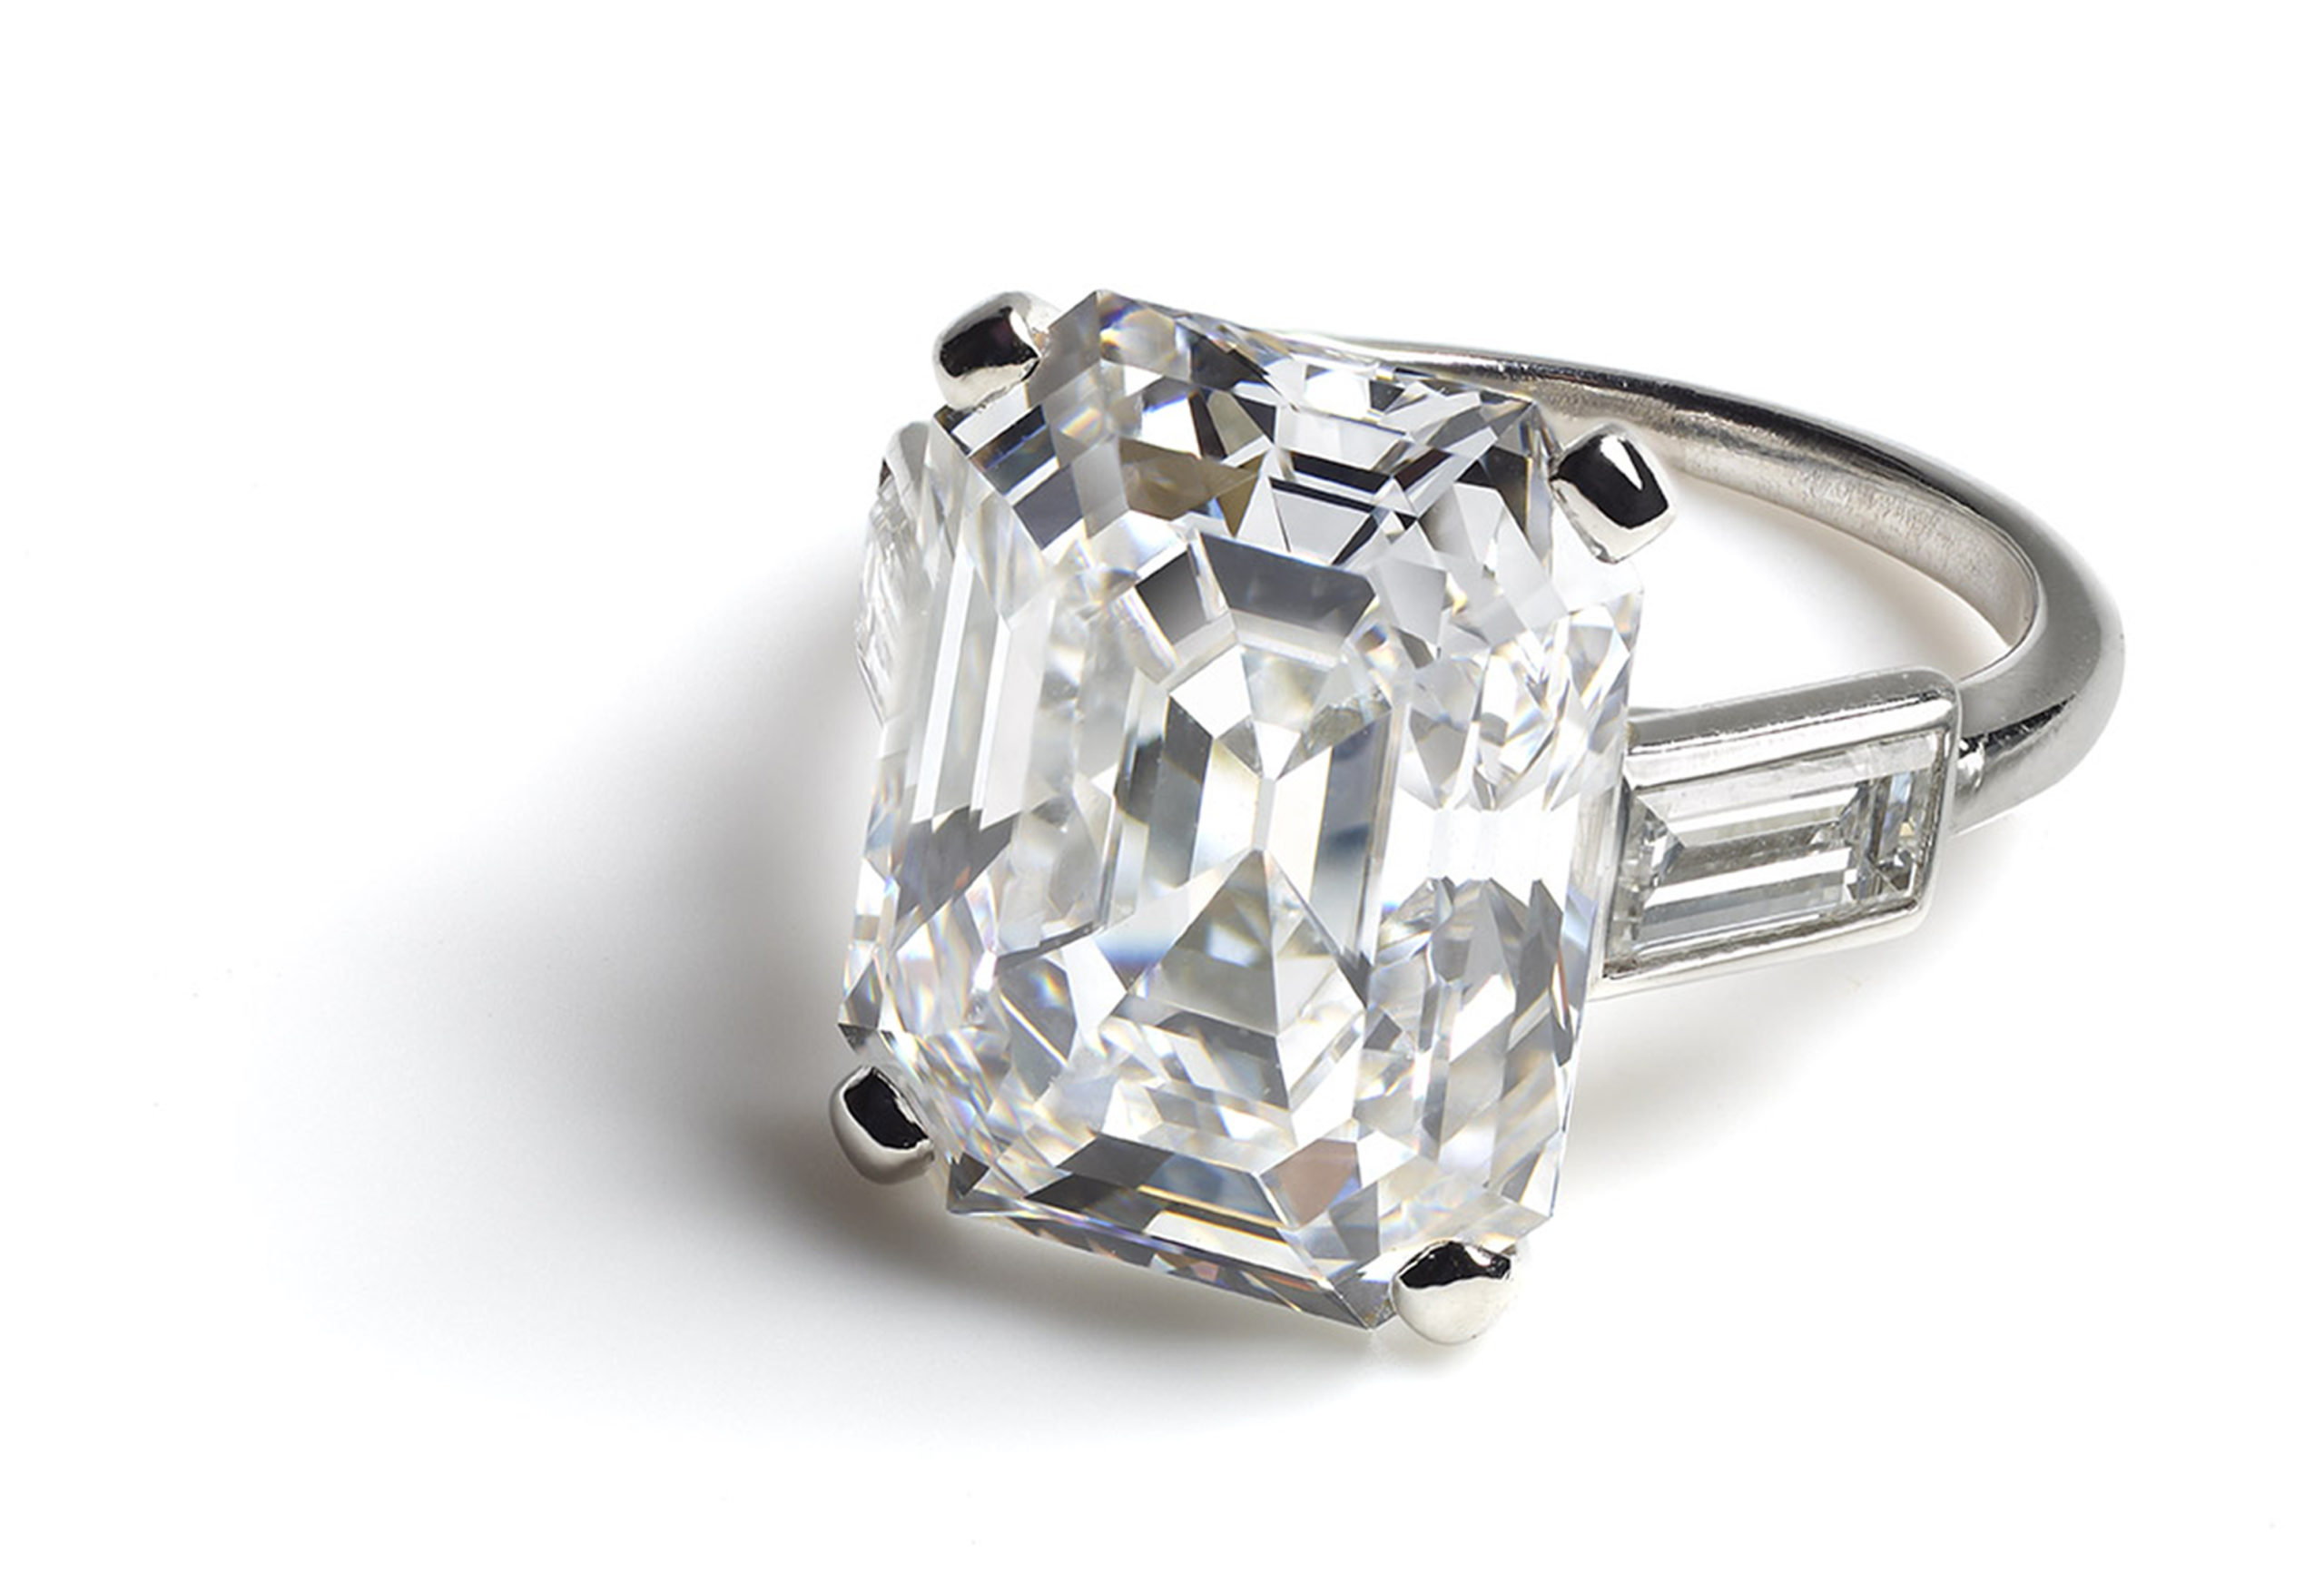 cartier grace kelly engagement ring